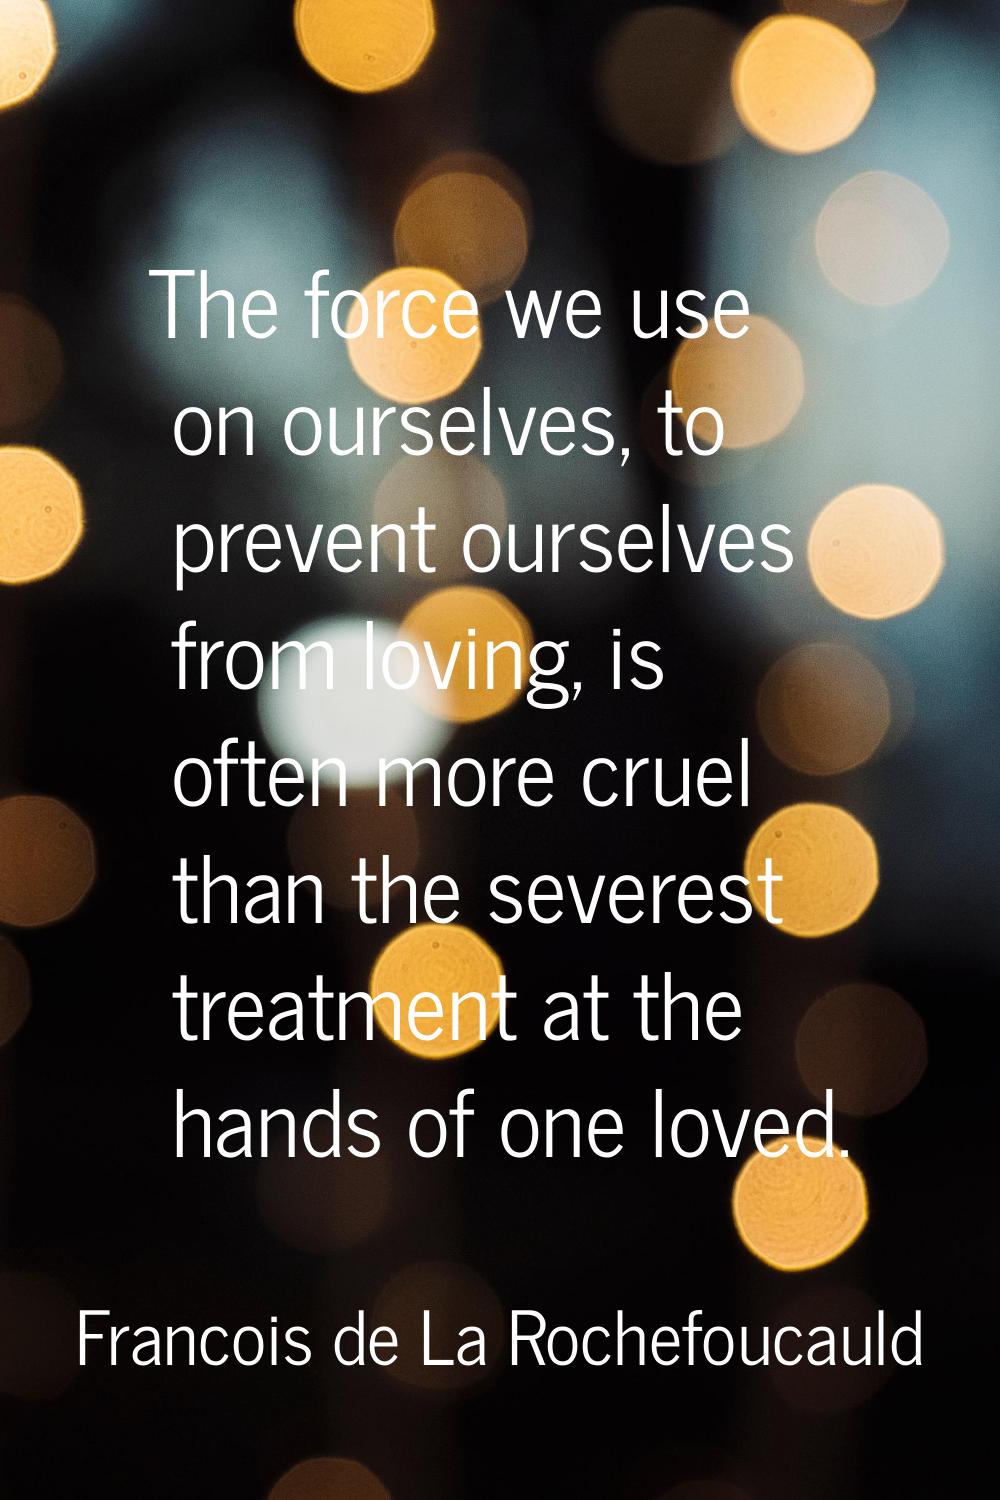 The force we use on ourselves, to prevent ourselves from loving, is often more cruel than the sever